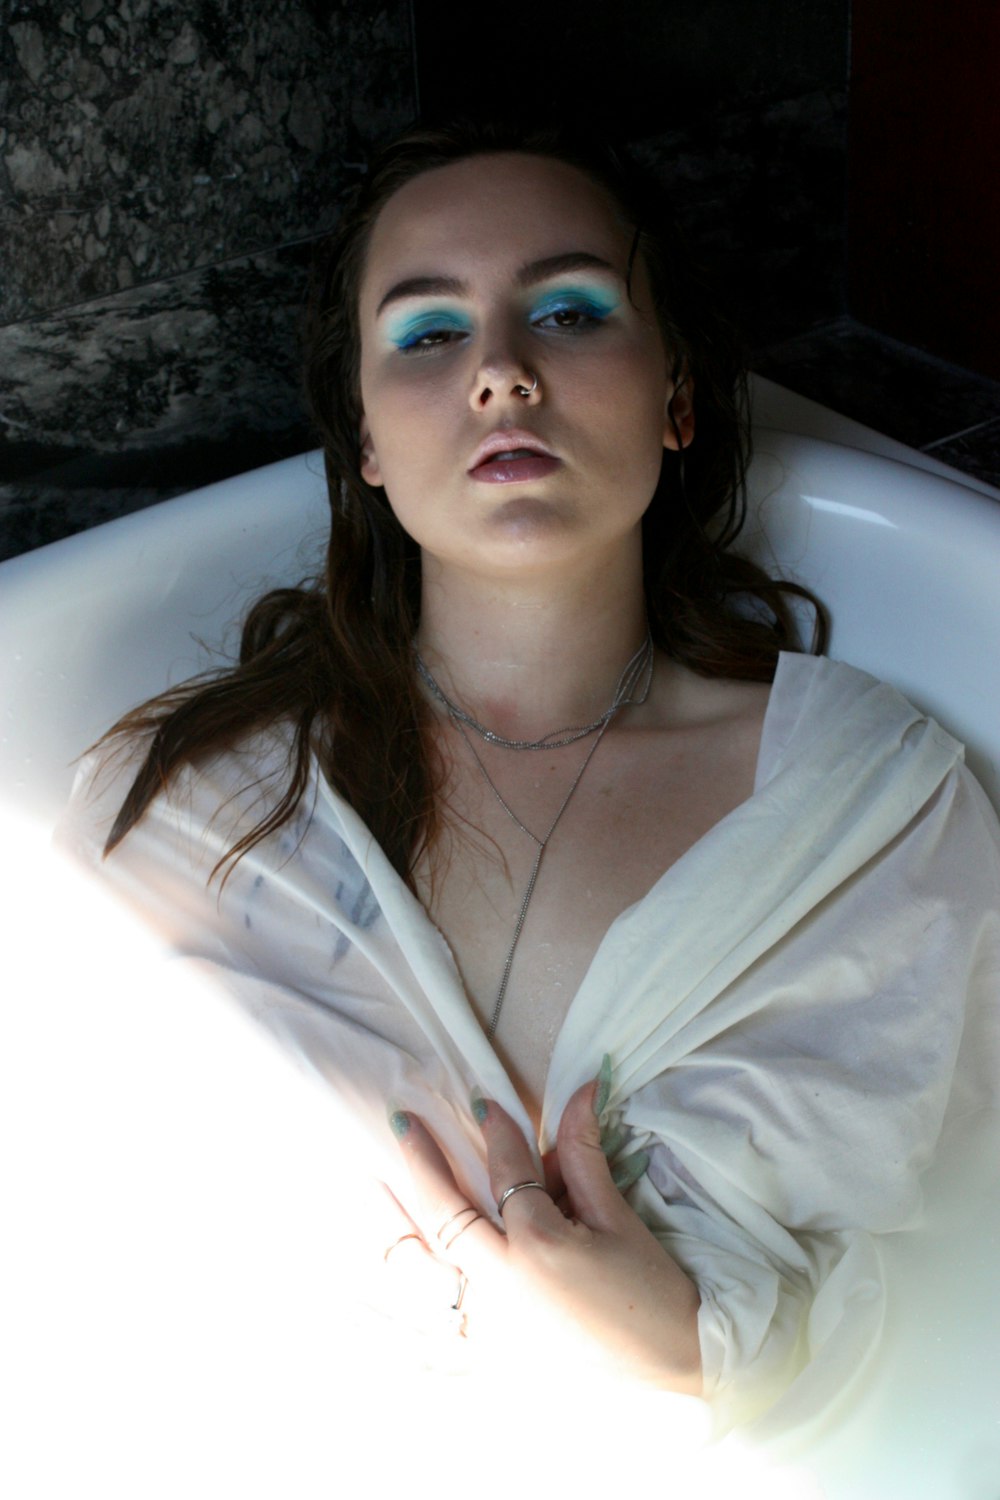 woman in bathtub close-up photography